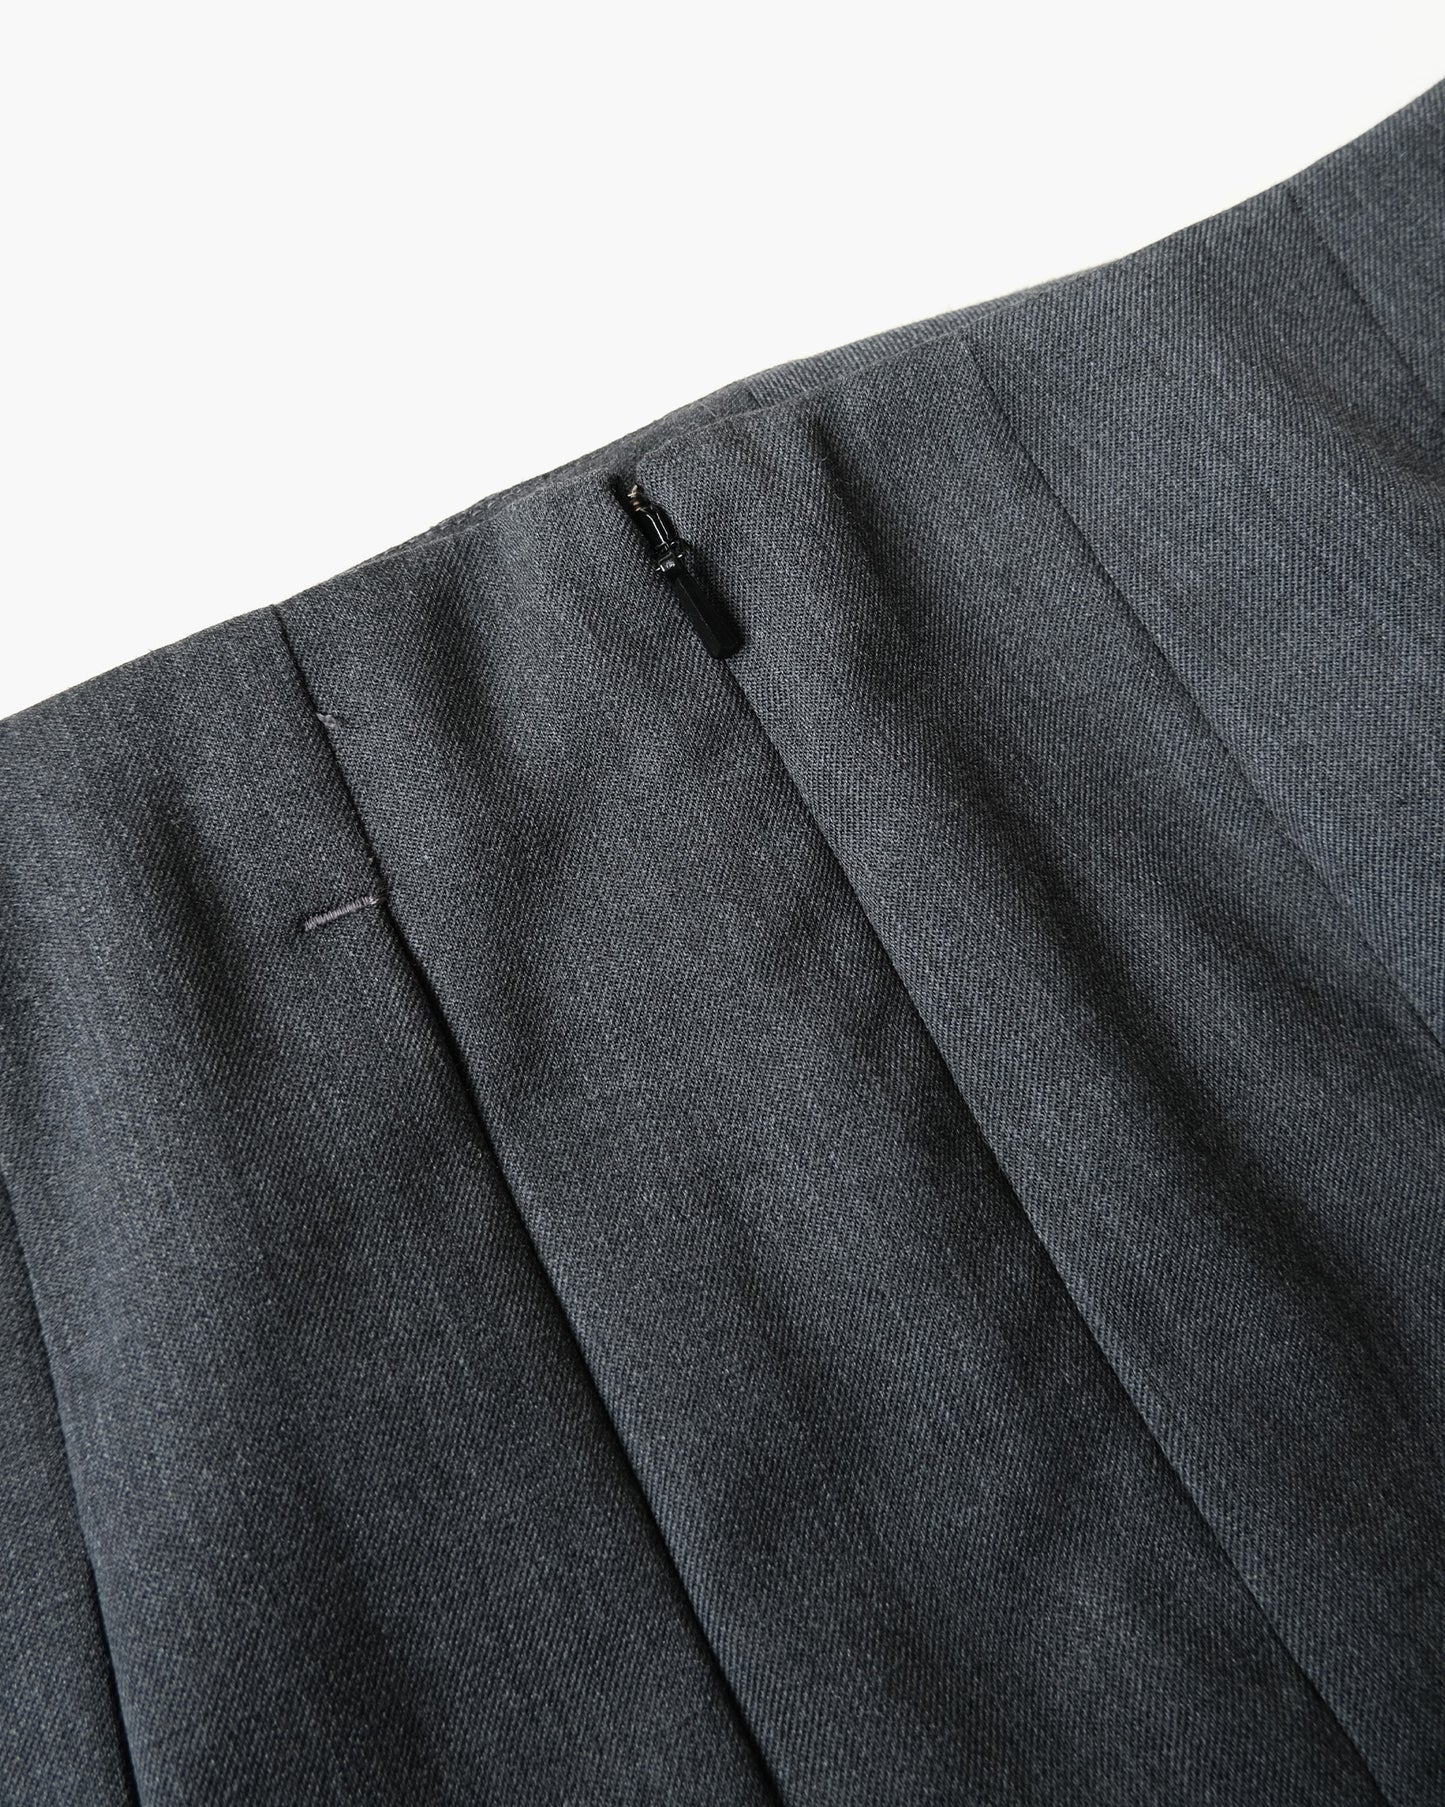 Angels Factory Pleated Skirt by 404